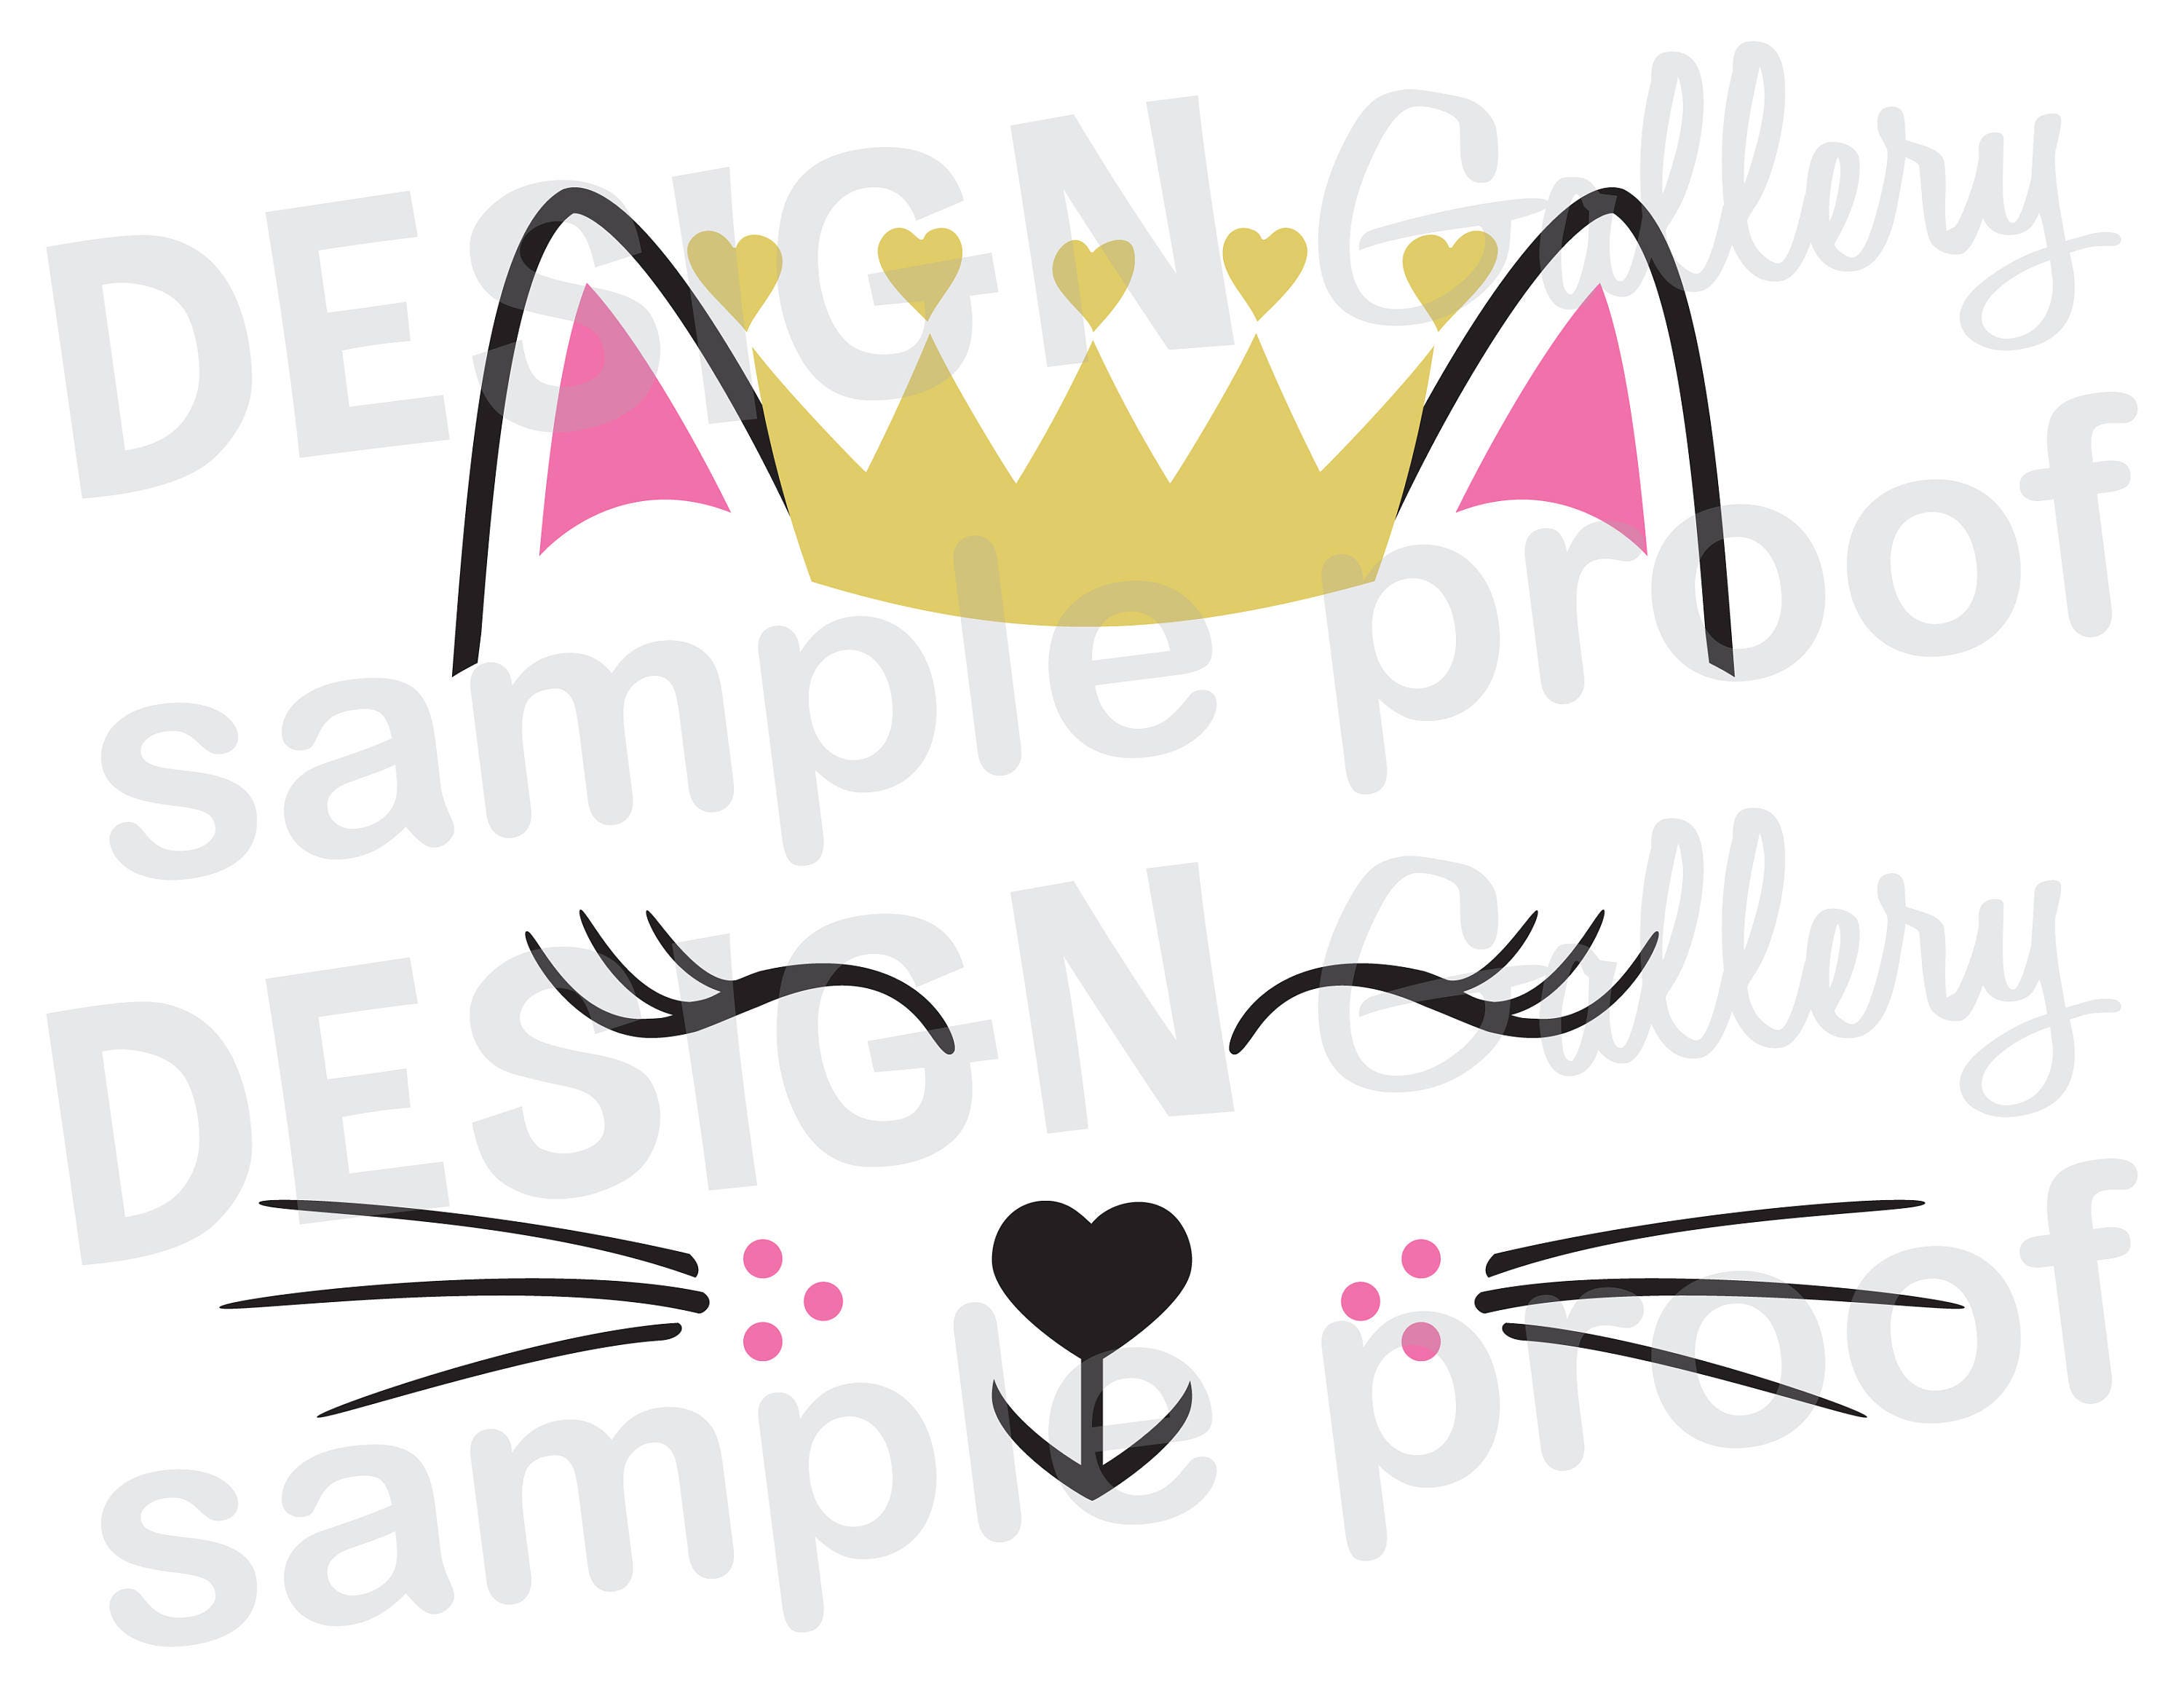 Download Kitty Cat Kitten Face Crown JPG png & SVG DXF cut file